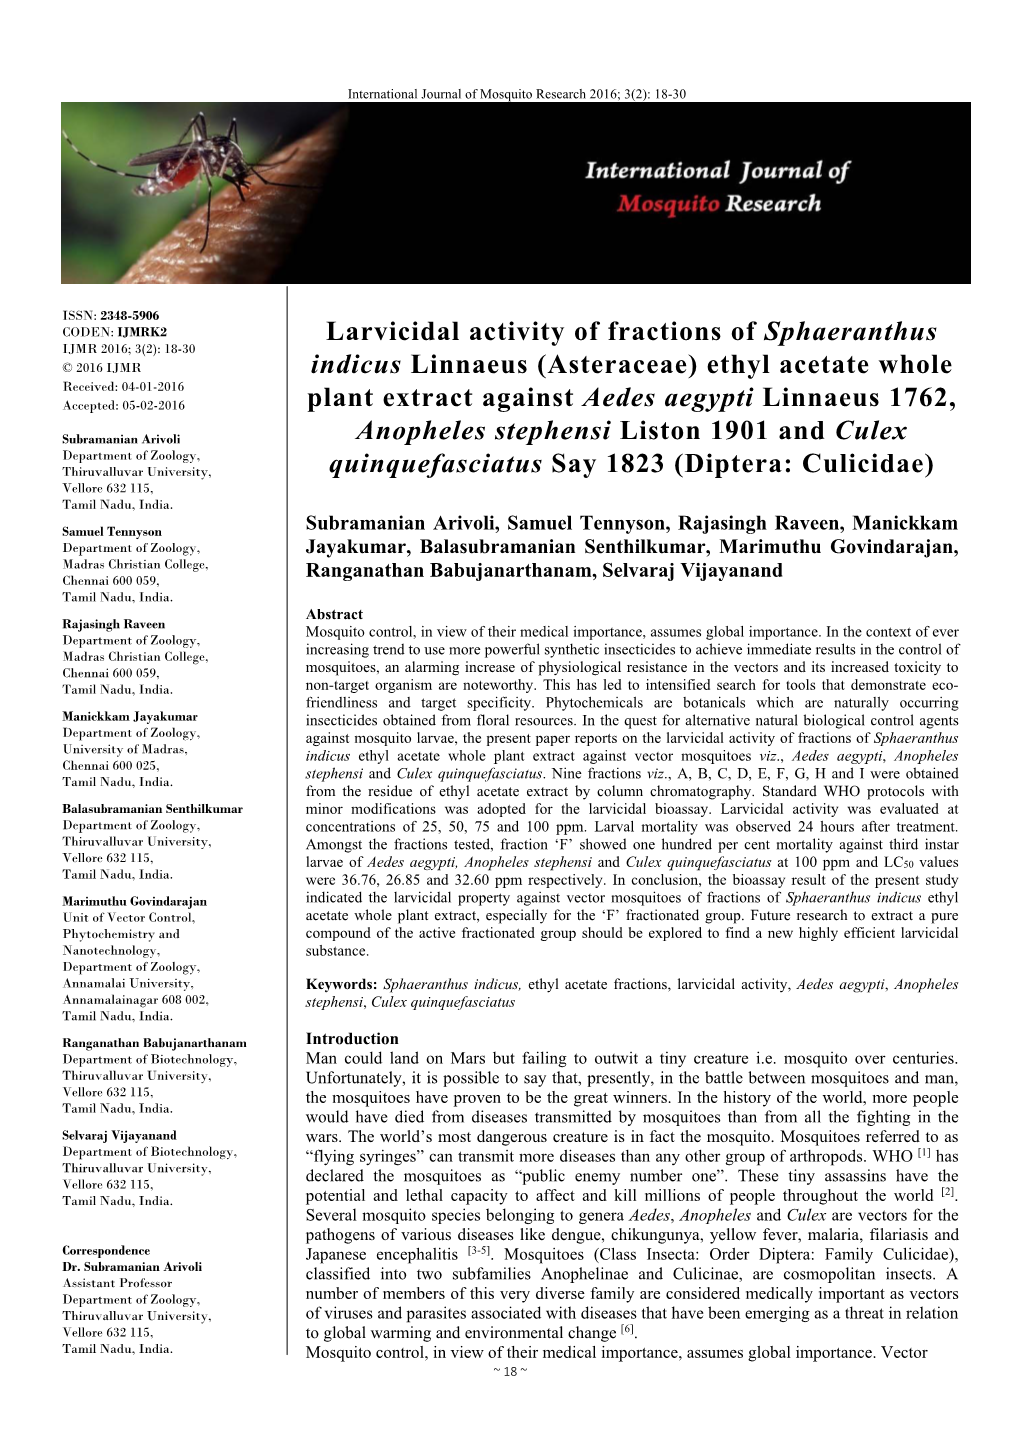 Larvicidal Activity of Fractions of Sphaeranthus Indicus Linnaeus (Asteraceae) Ethyl Acetate Whole Plant Extract Against Aedes A